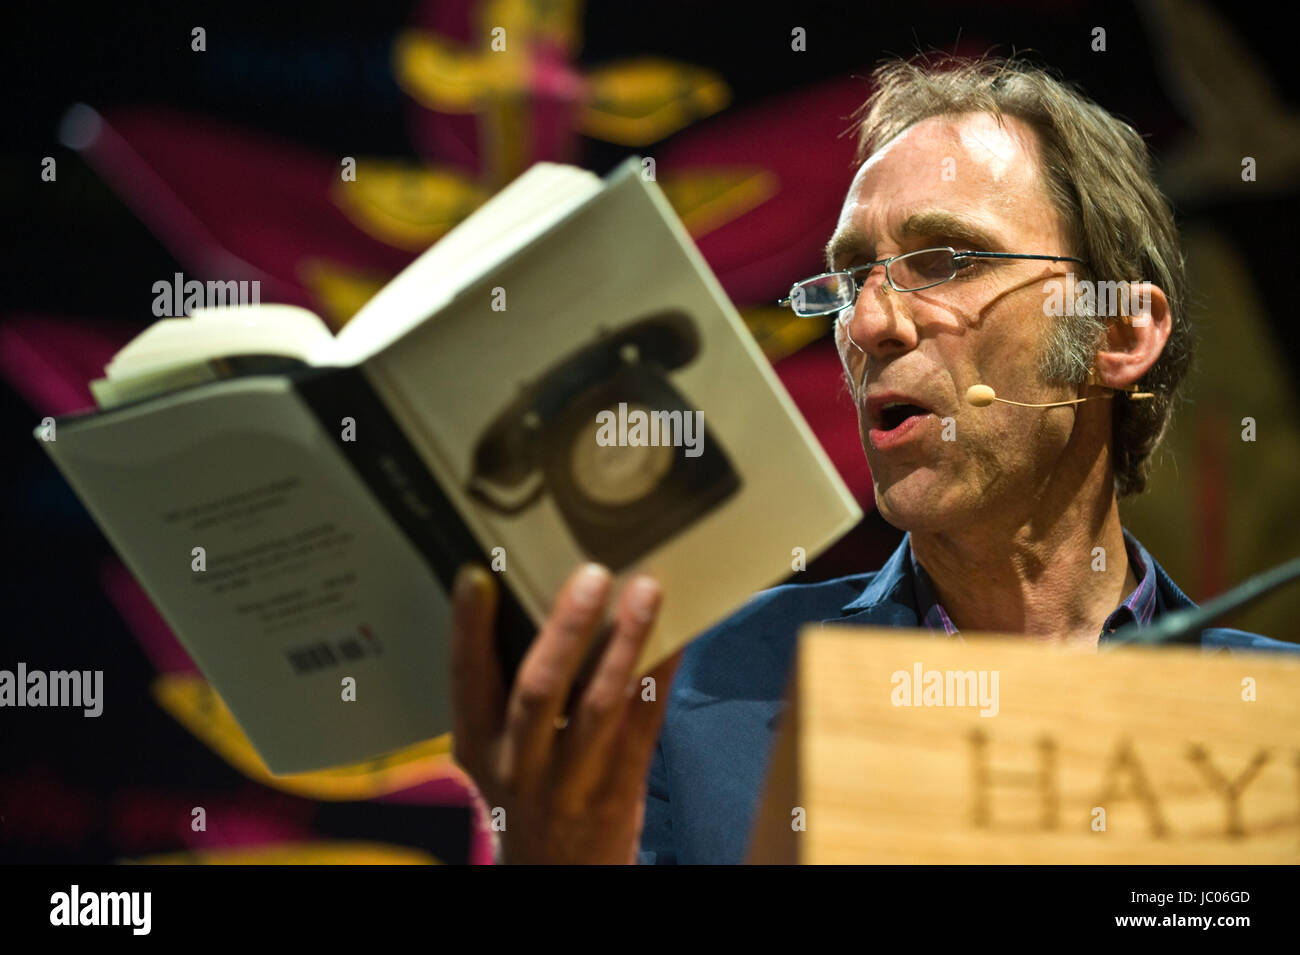 Will Self novelist reading from his novel Phone on stage at lectern during Hay Festival of Literature and the Arts 2017 Hay-on-Wye Powys Wales UK Stock Photo